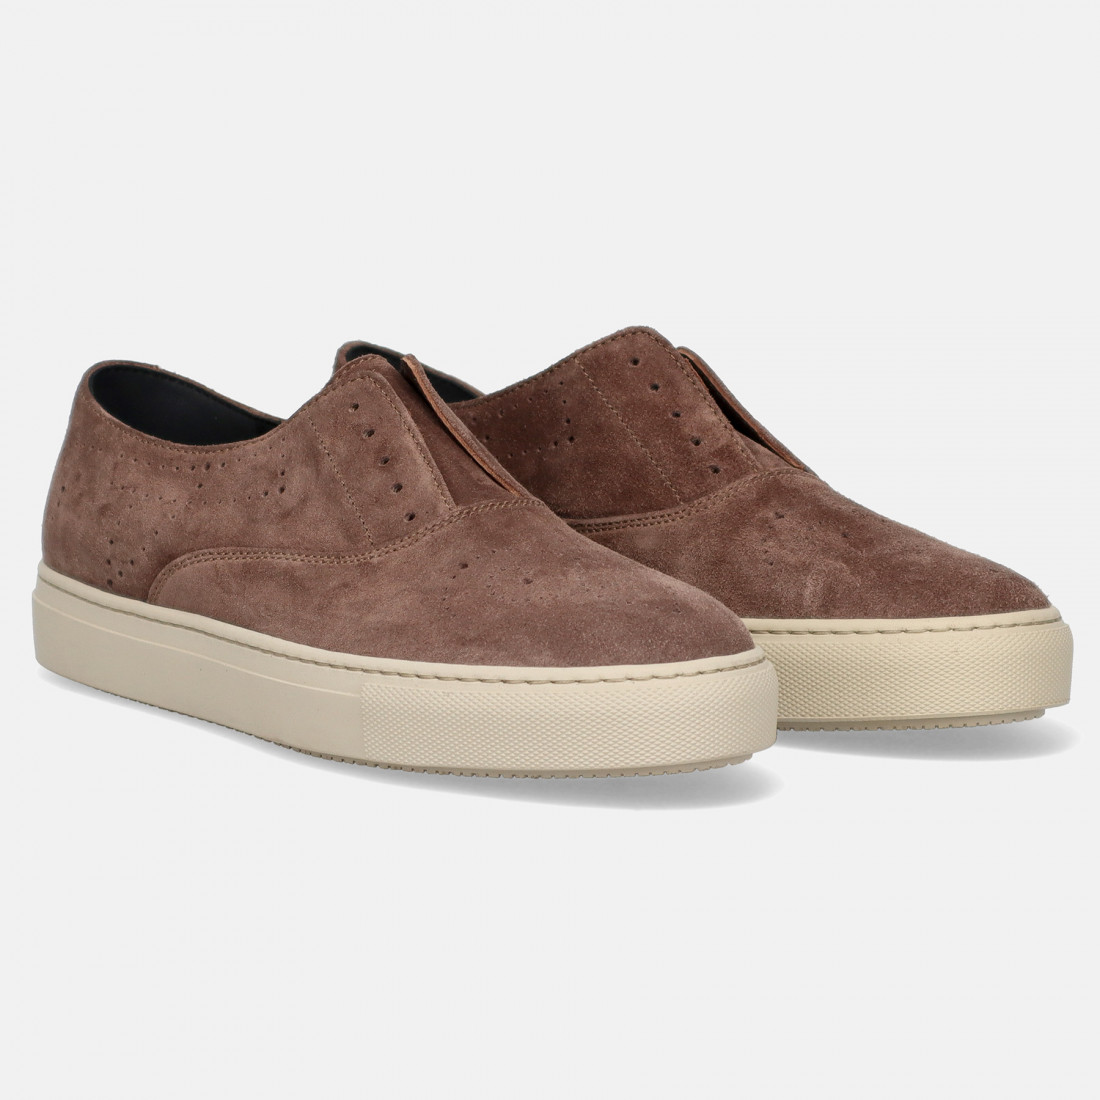 Fratelli Rossetti Hobo Sport casual shoe in taupe suede